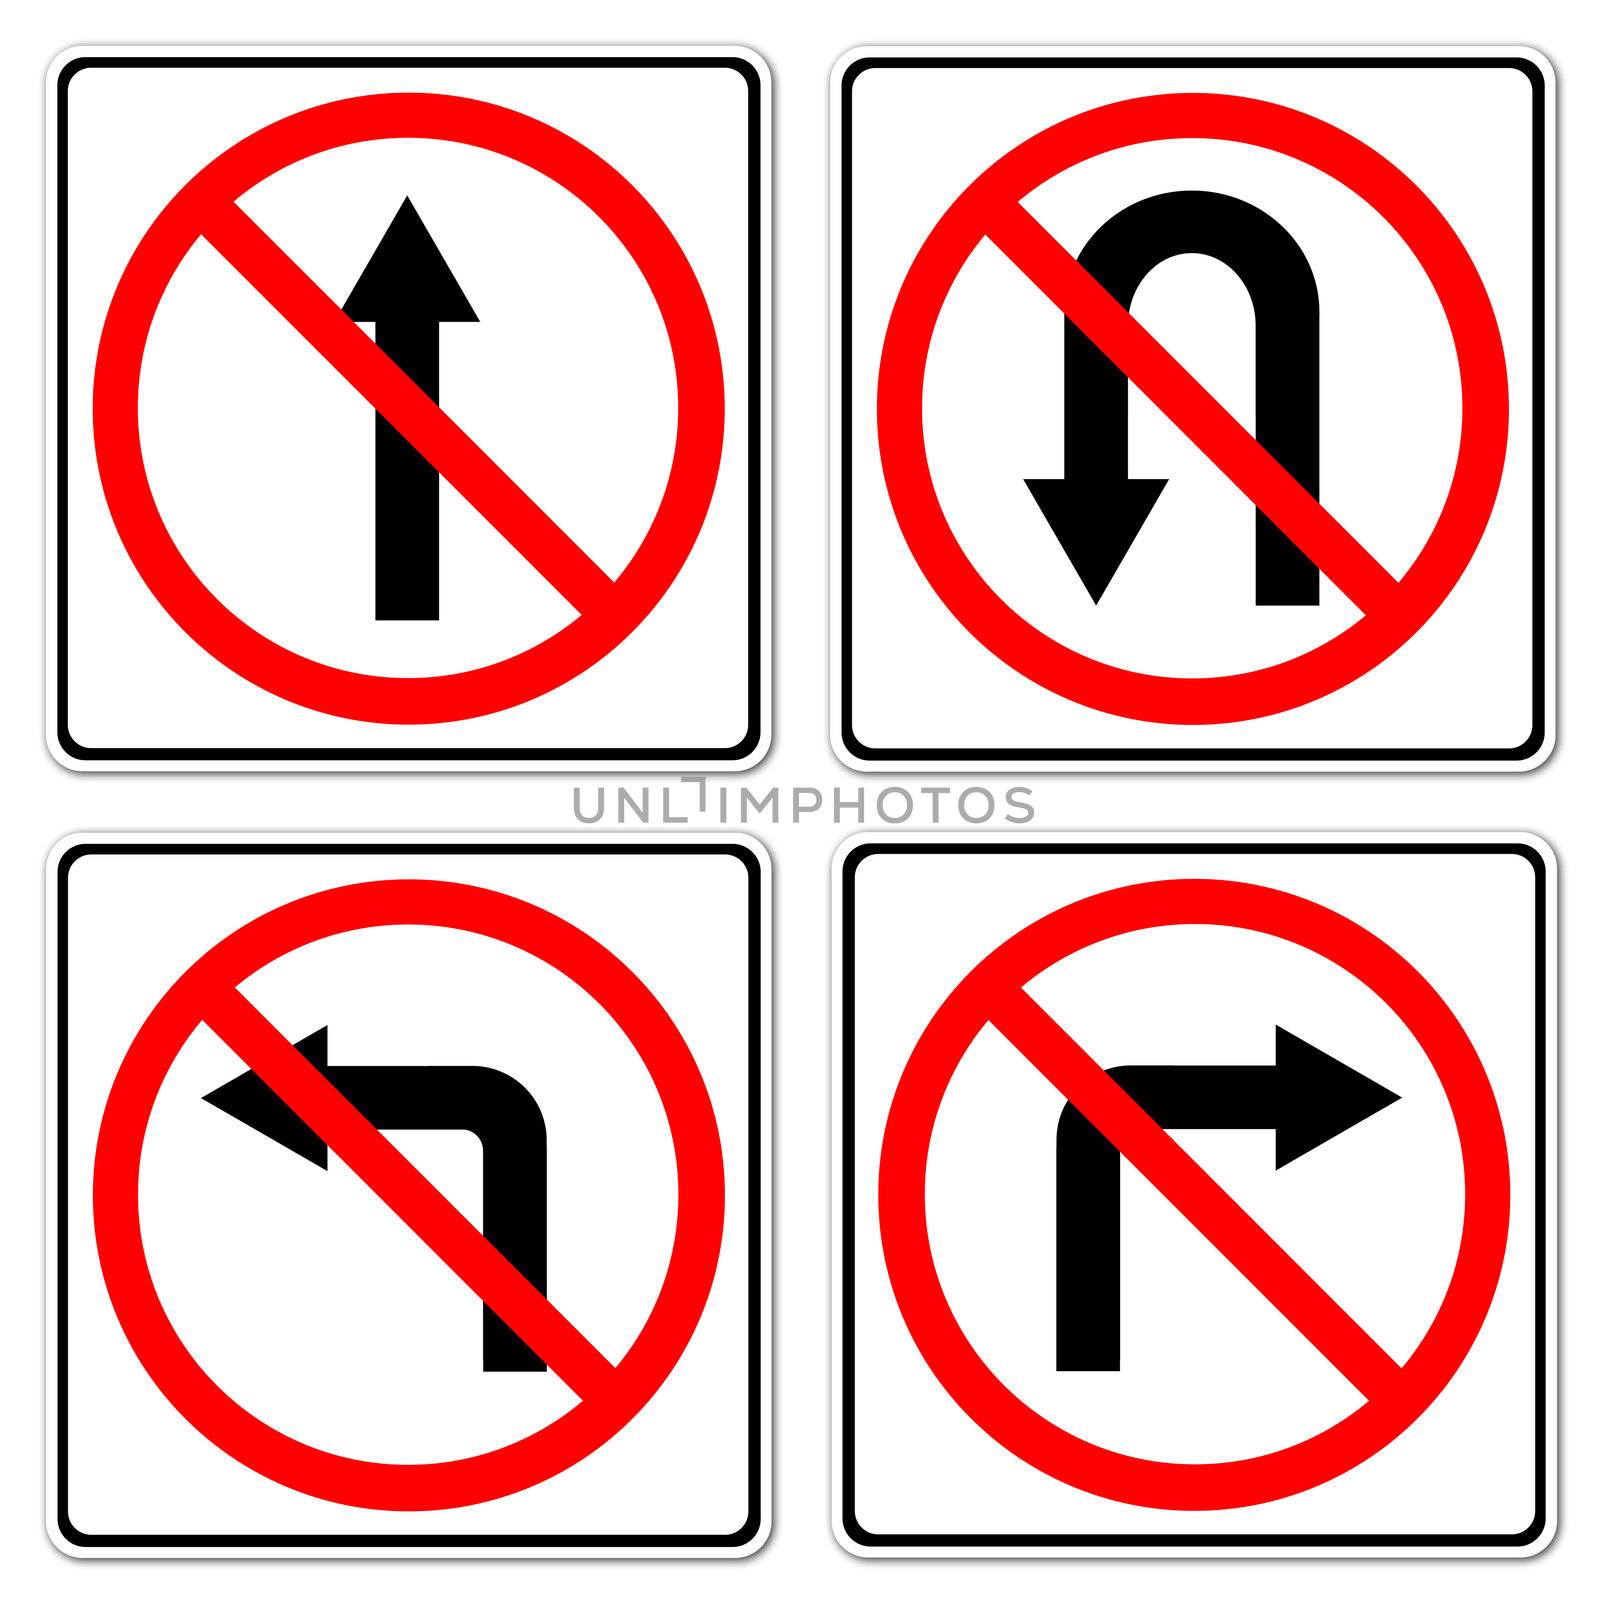 4 Do not do on red circle traffic sign by geargodz